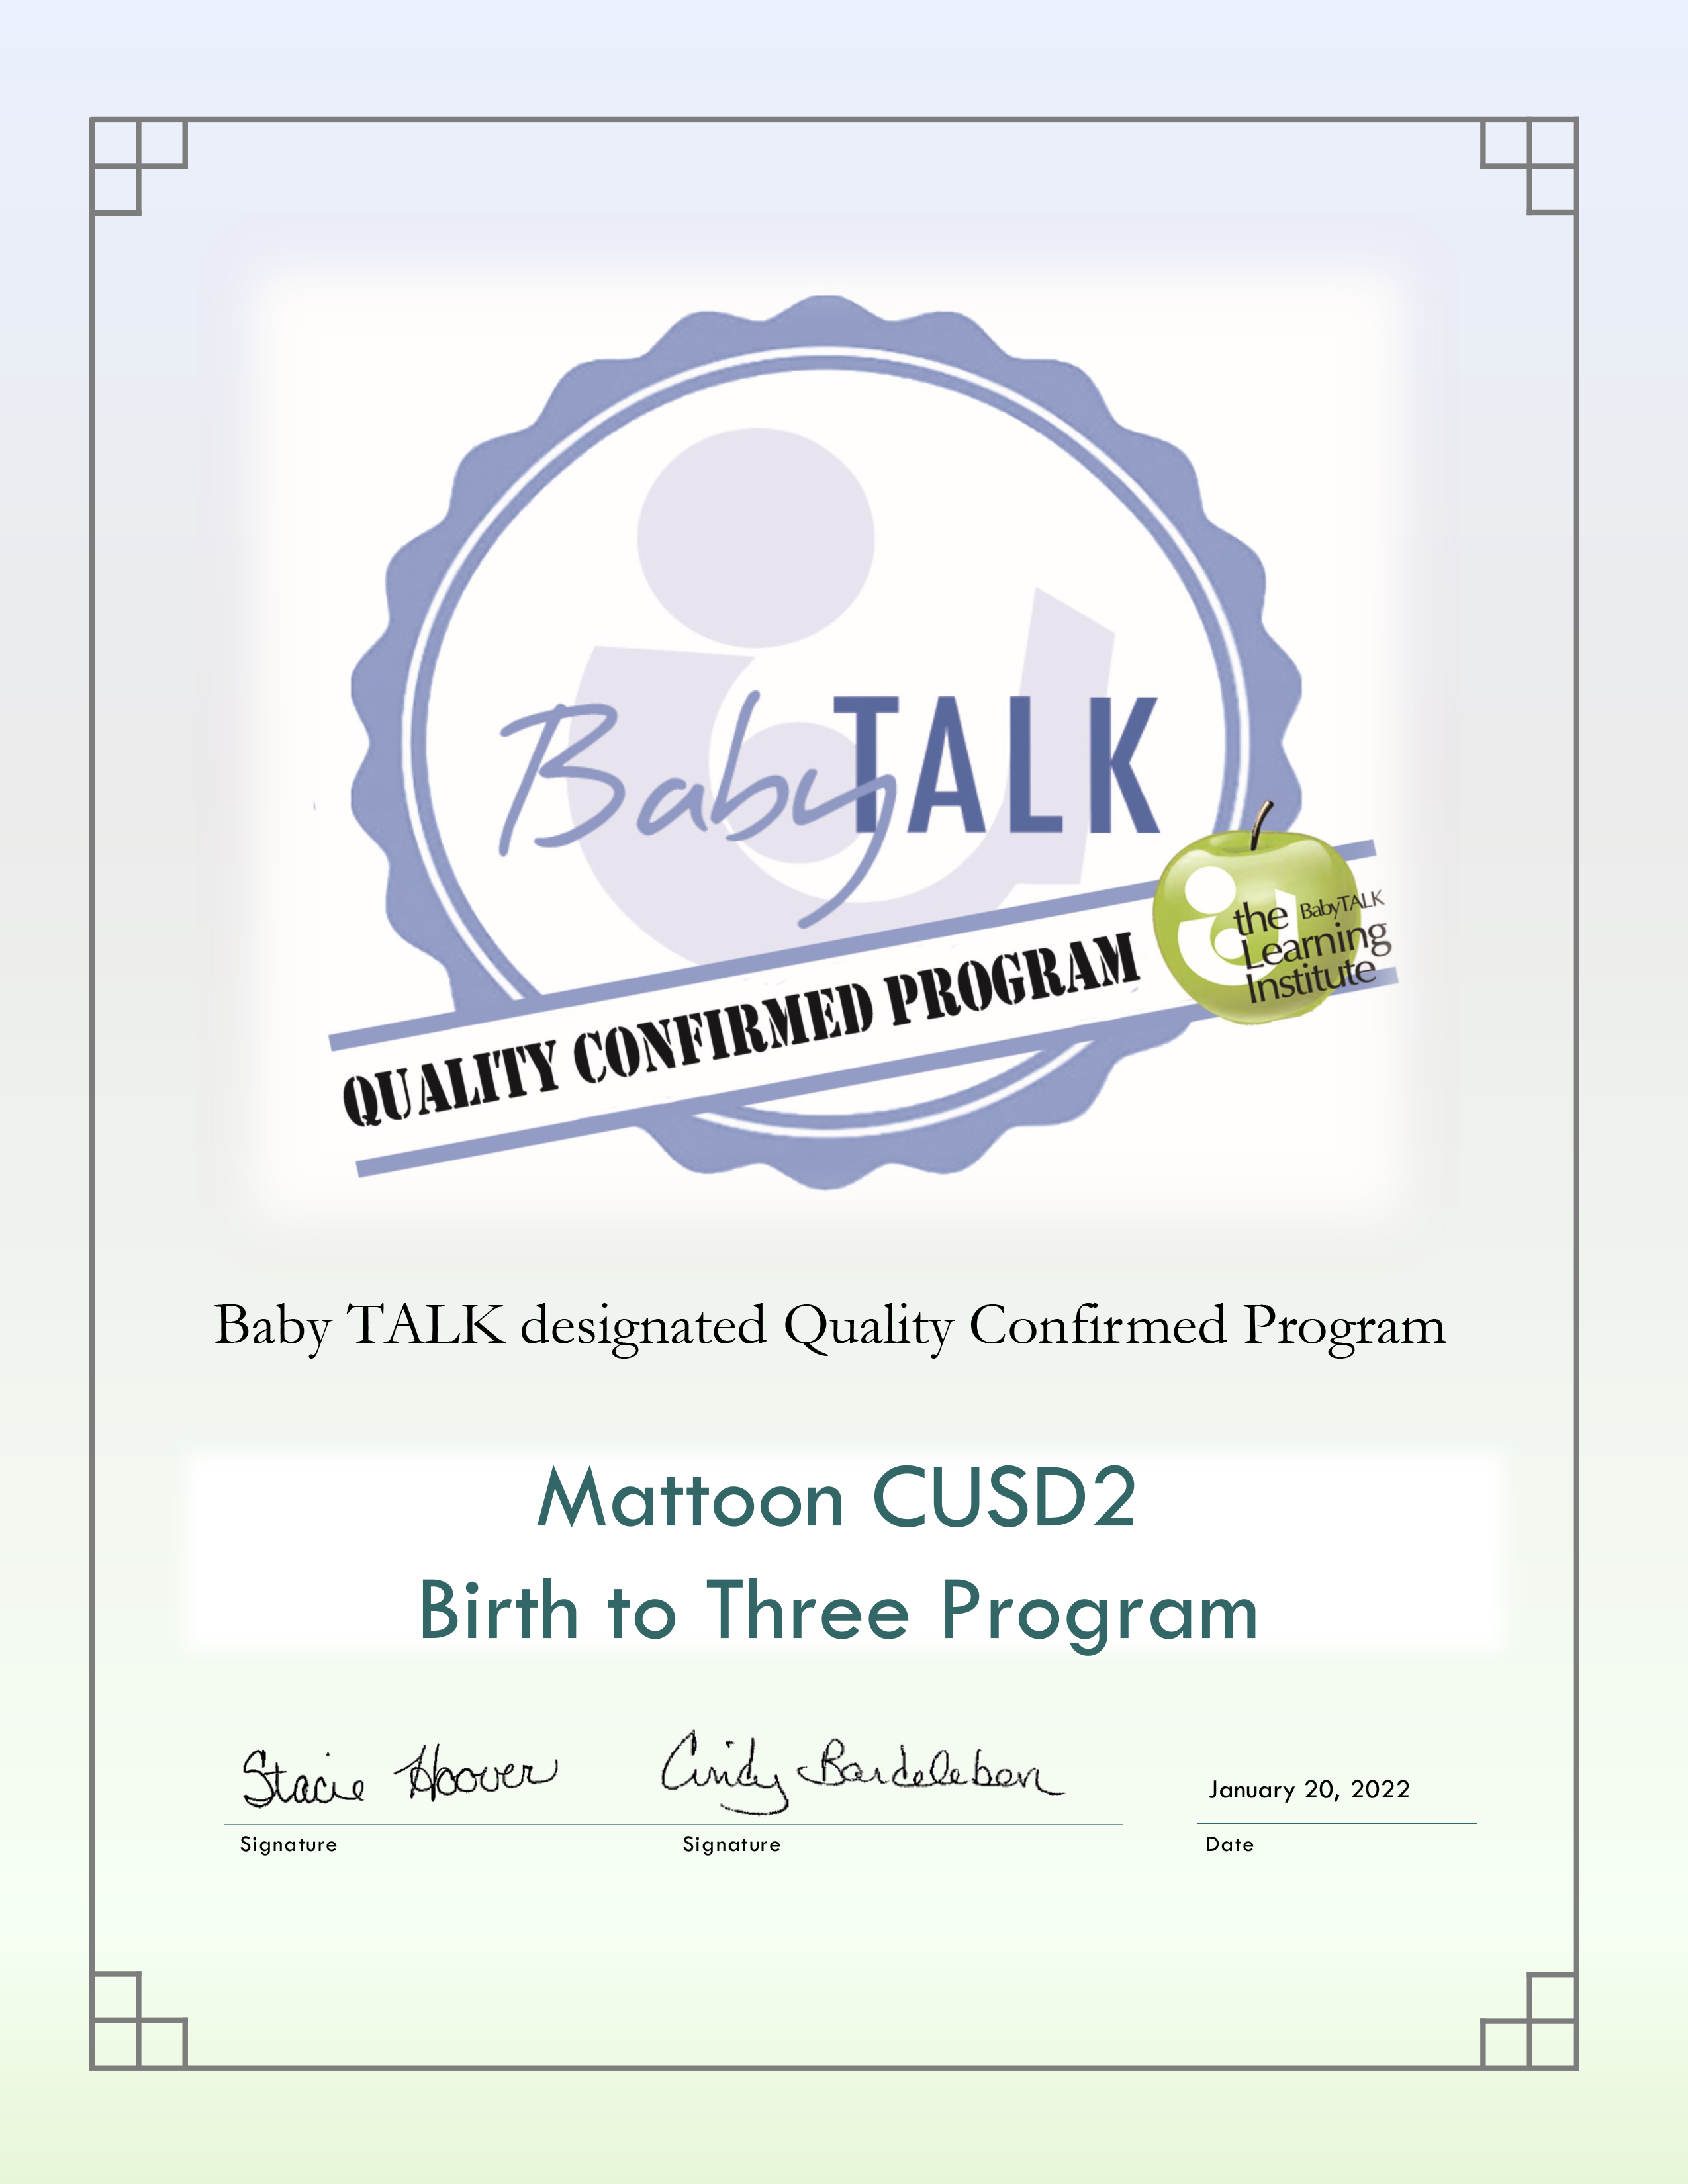 Birth to 3 is a Baby Talk Quality Confirmed Program